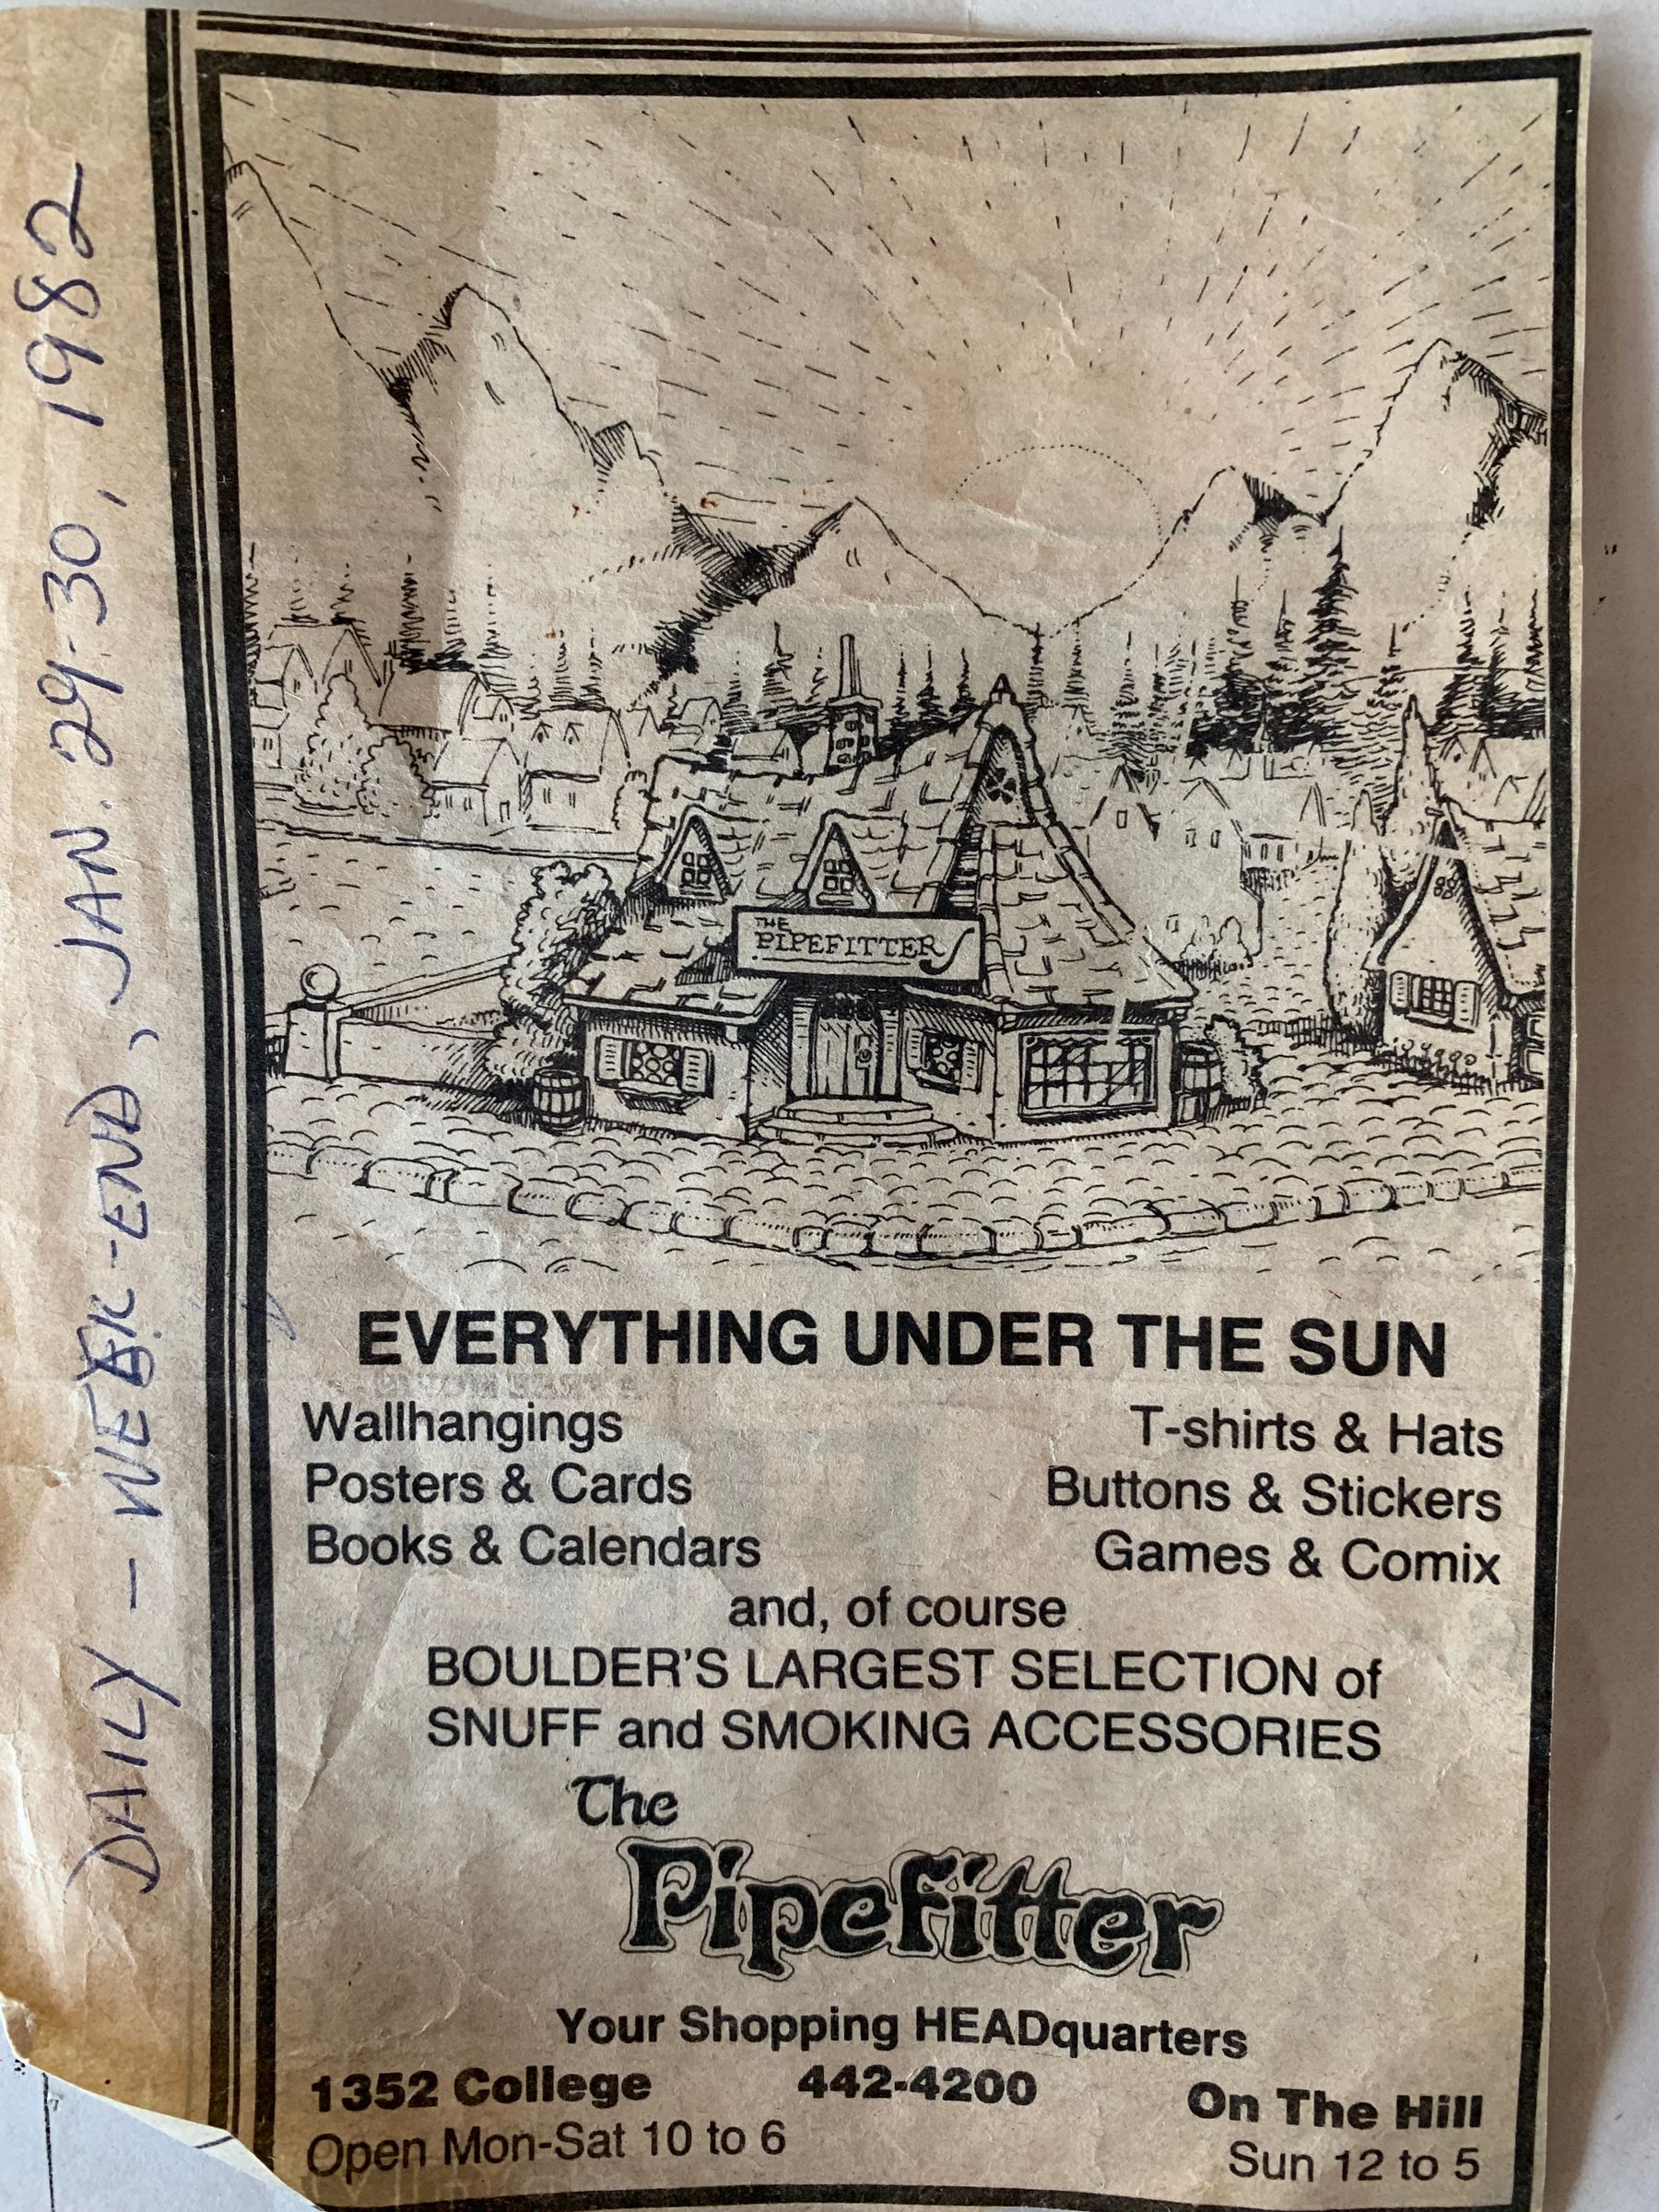 A poster from The Fitter's 35 year anniversary.